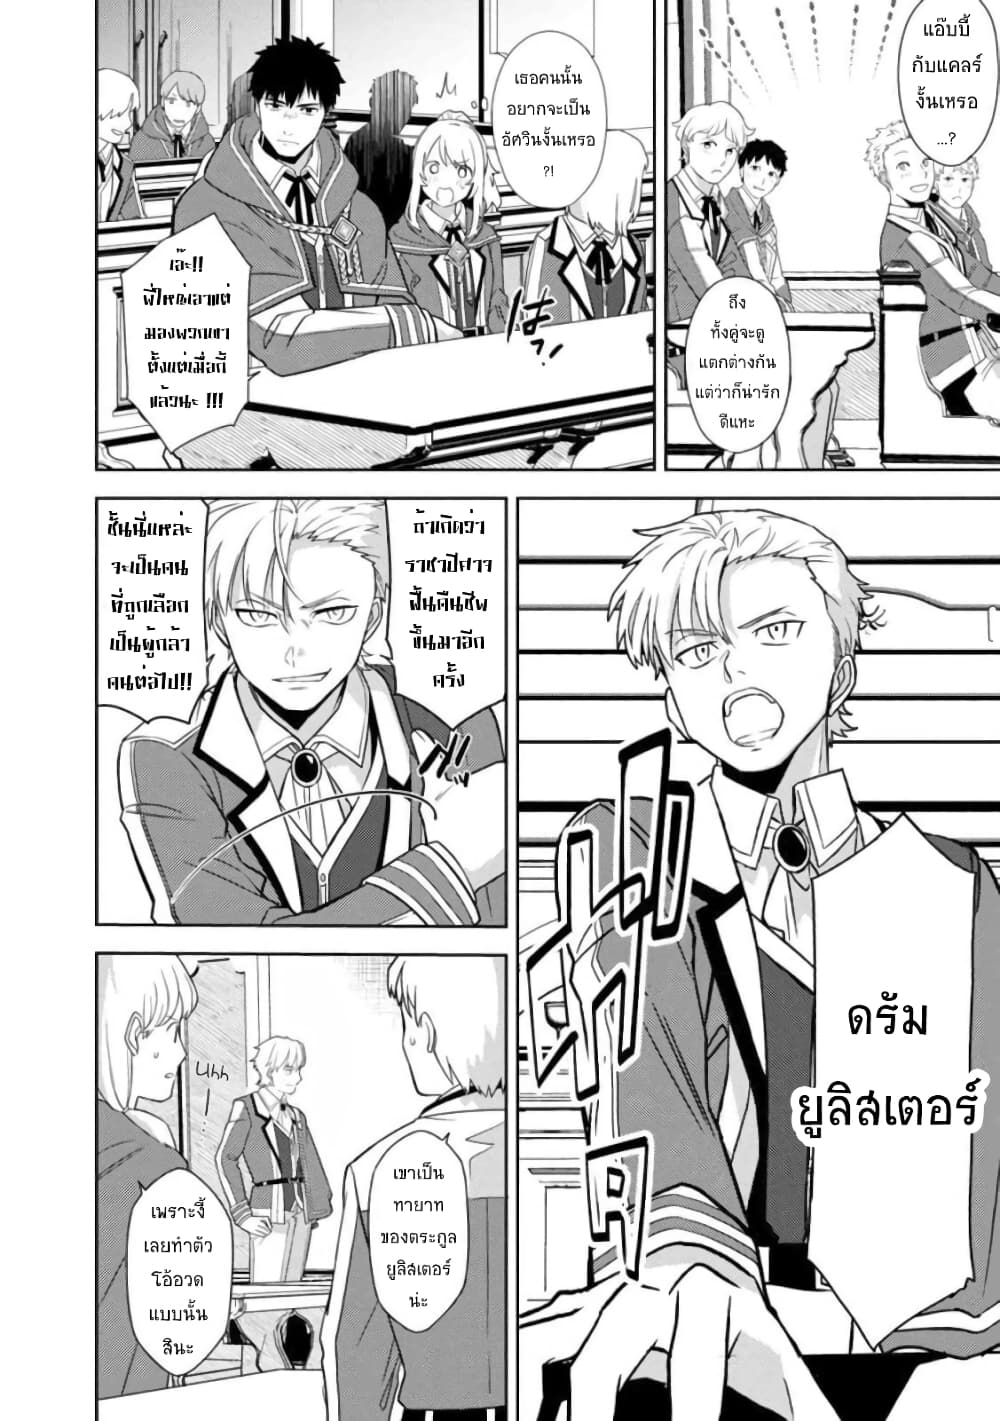 The Reincarnated Swordsman With 9999 Strength Wants to Become a Magician! ตอนที่ 2.1 (12)